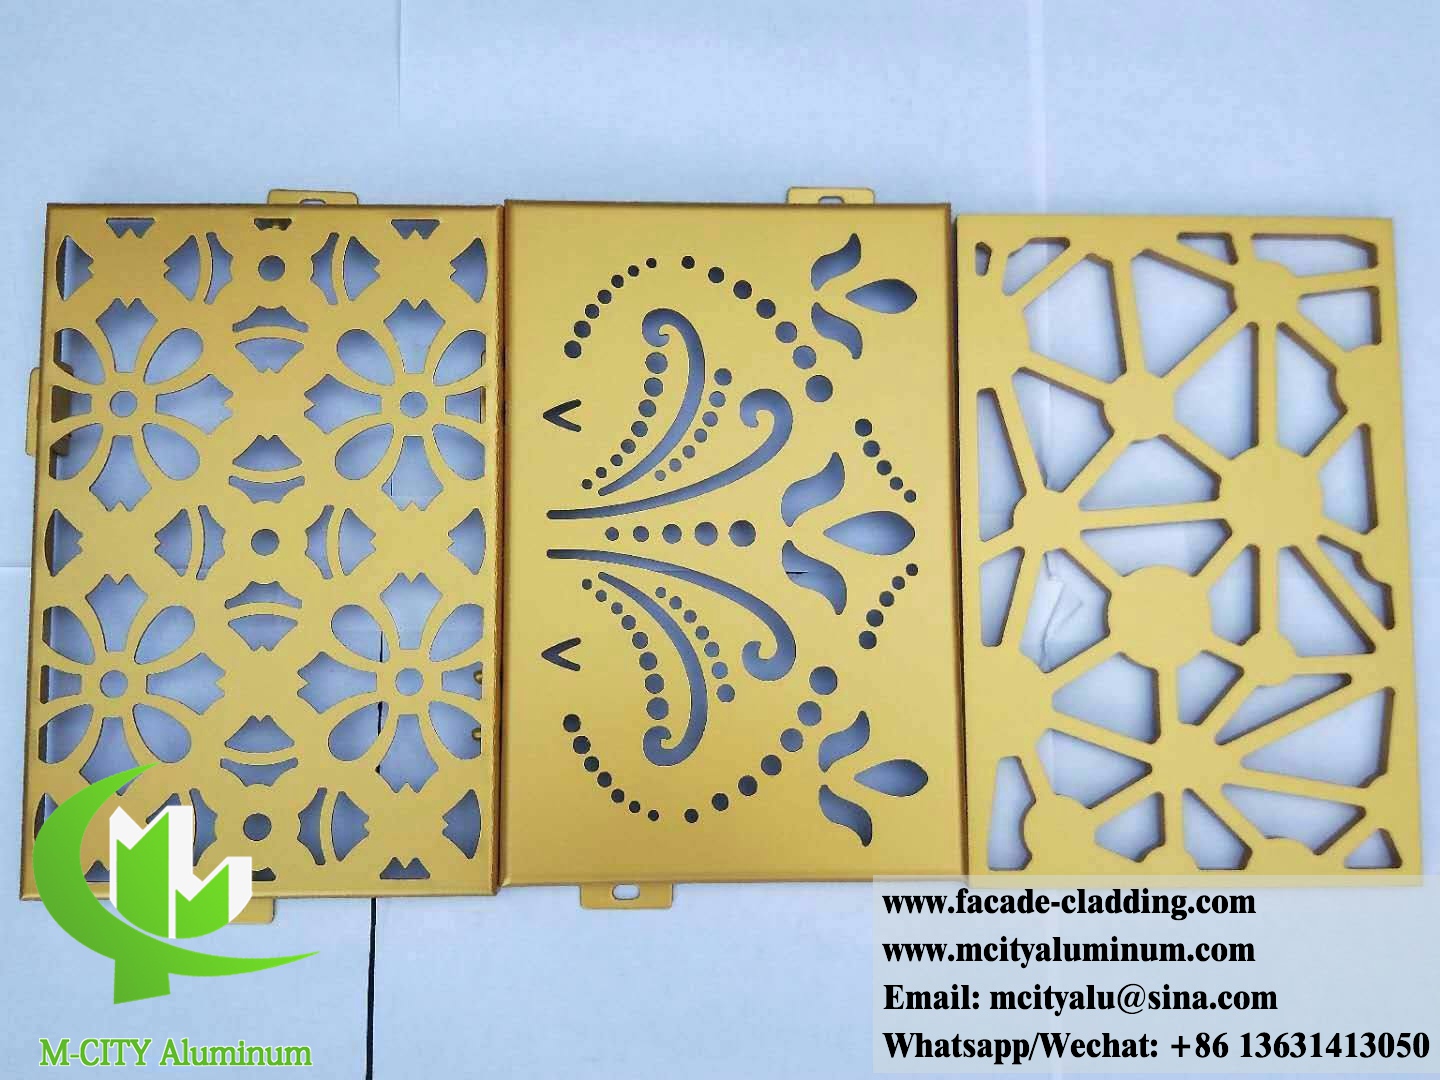 Customized laser cut aluminum plate cladding panels for building facades